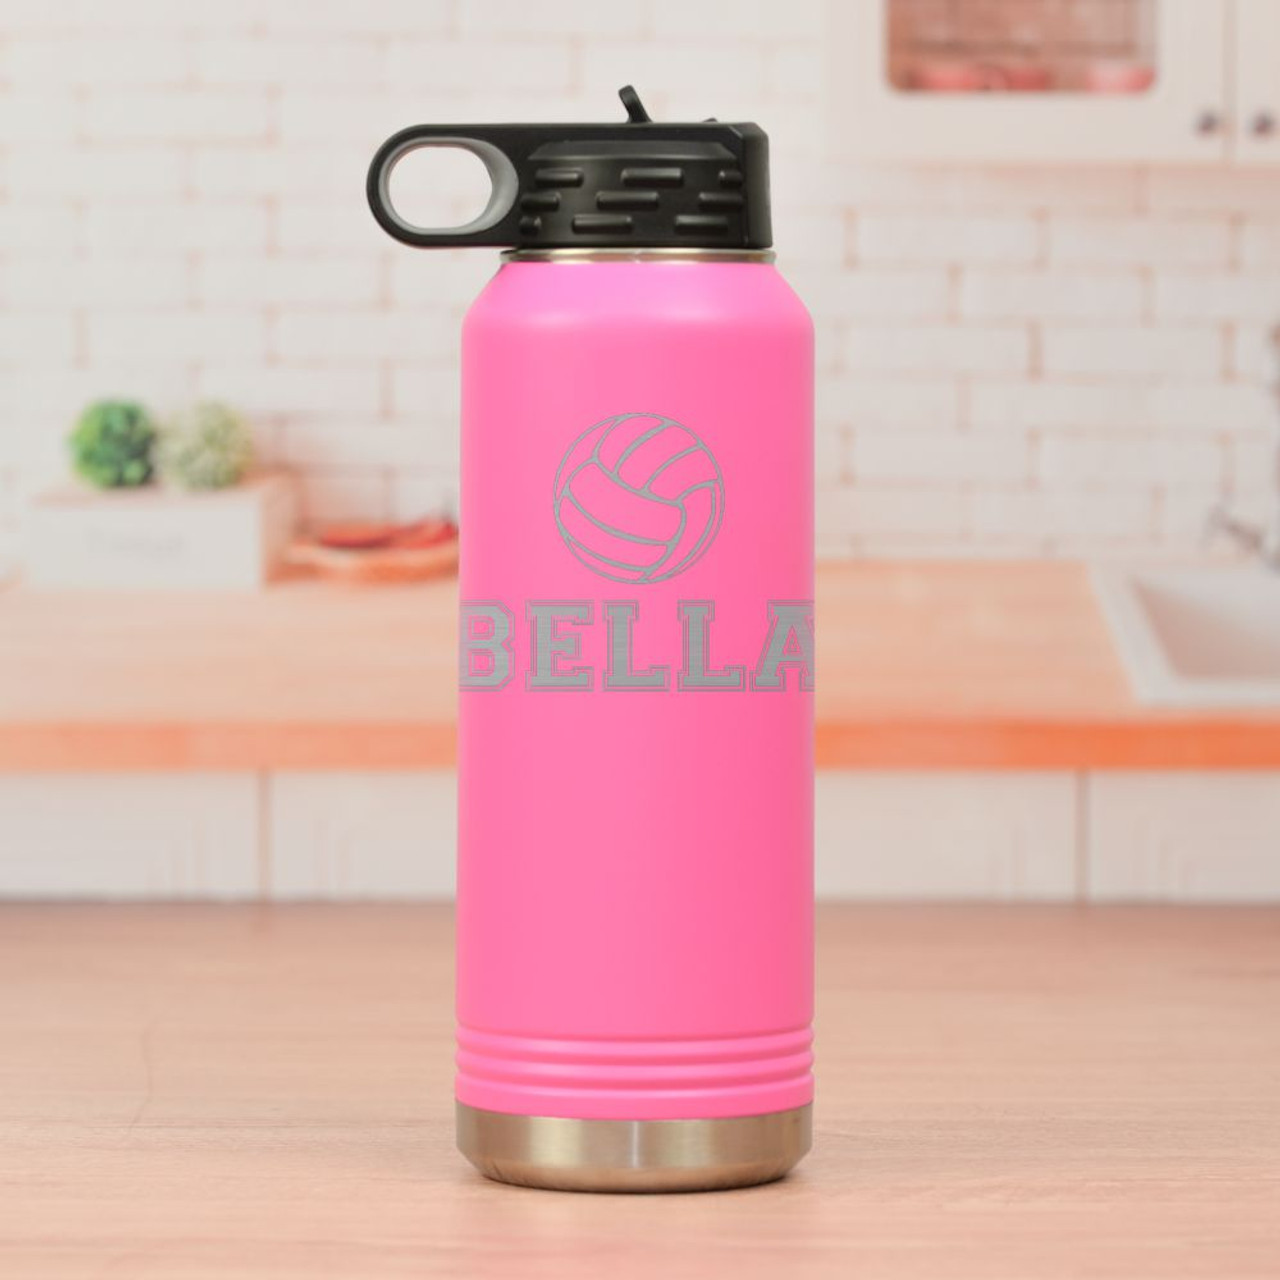 https://cdn11.bigcommerce.com/s-mdwz5t7wme/images/stencil/1280x1280/products/1976/6301/DW5037Volleyball-waterbottle__68362.1701373721.jpg?c=2?imbypass=on